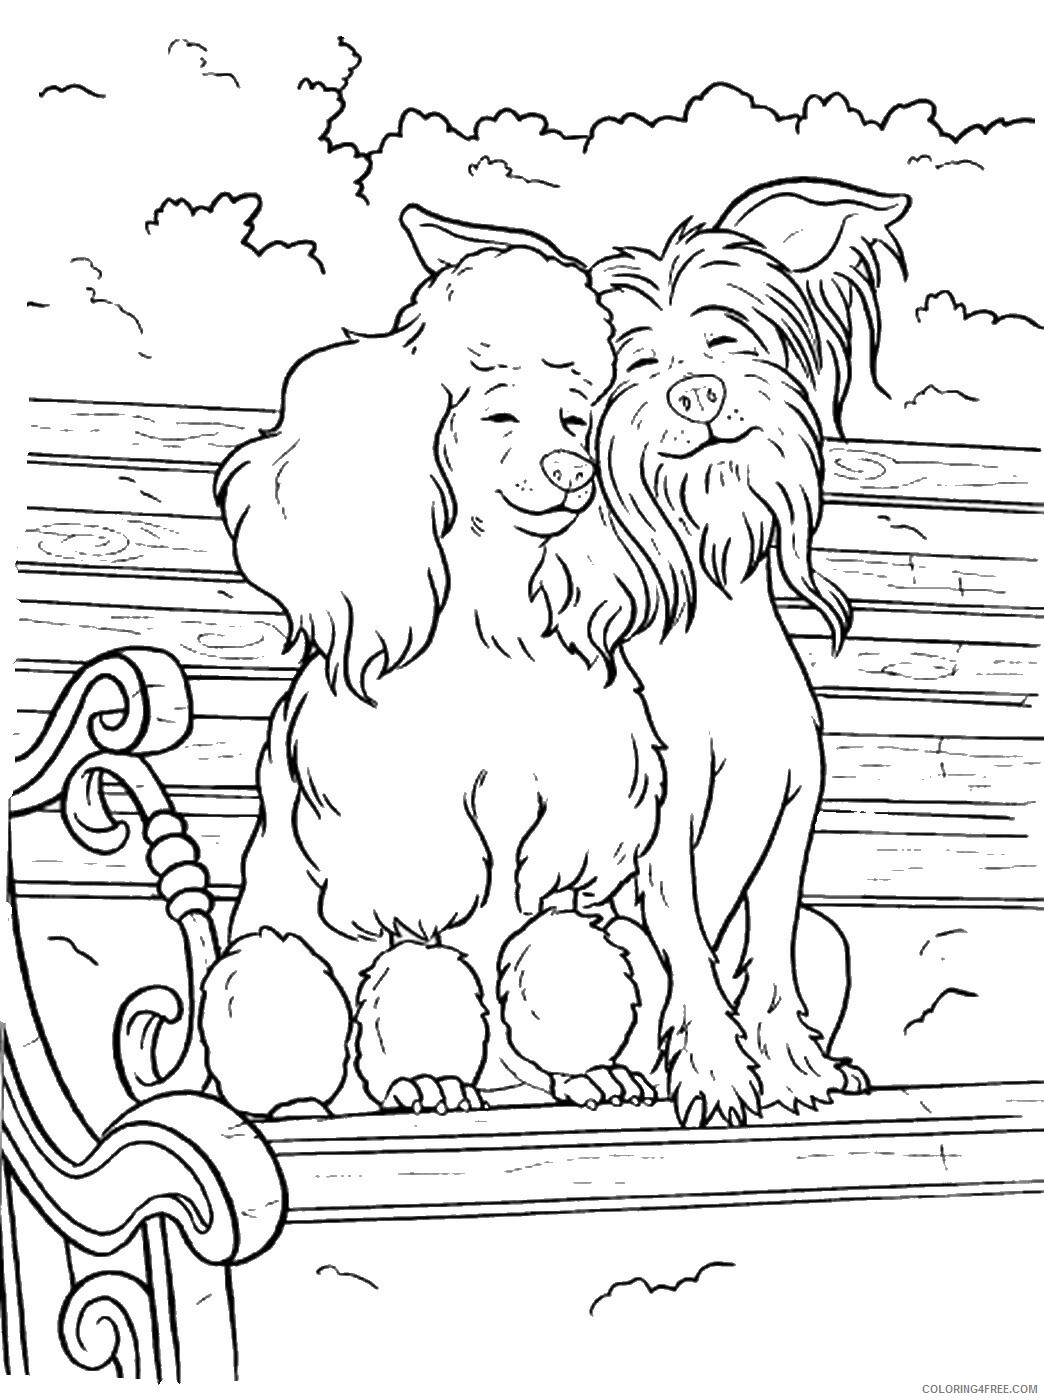 Hotel for Dogs Coloring Pages TV Film hotel_for_dogs_cl07 Printable 2020 03779 Coloring4free